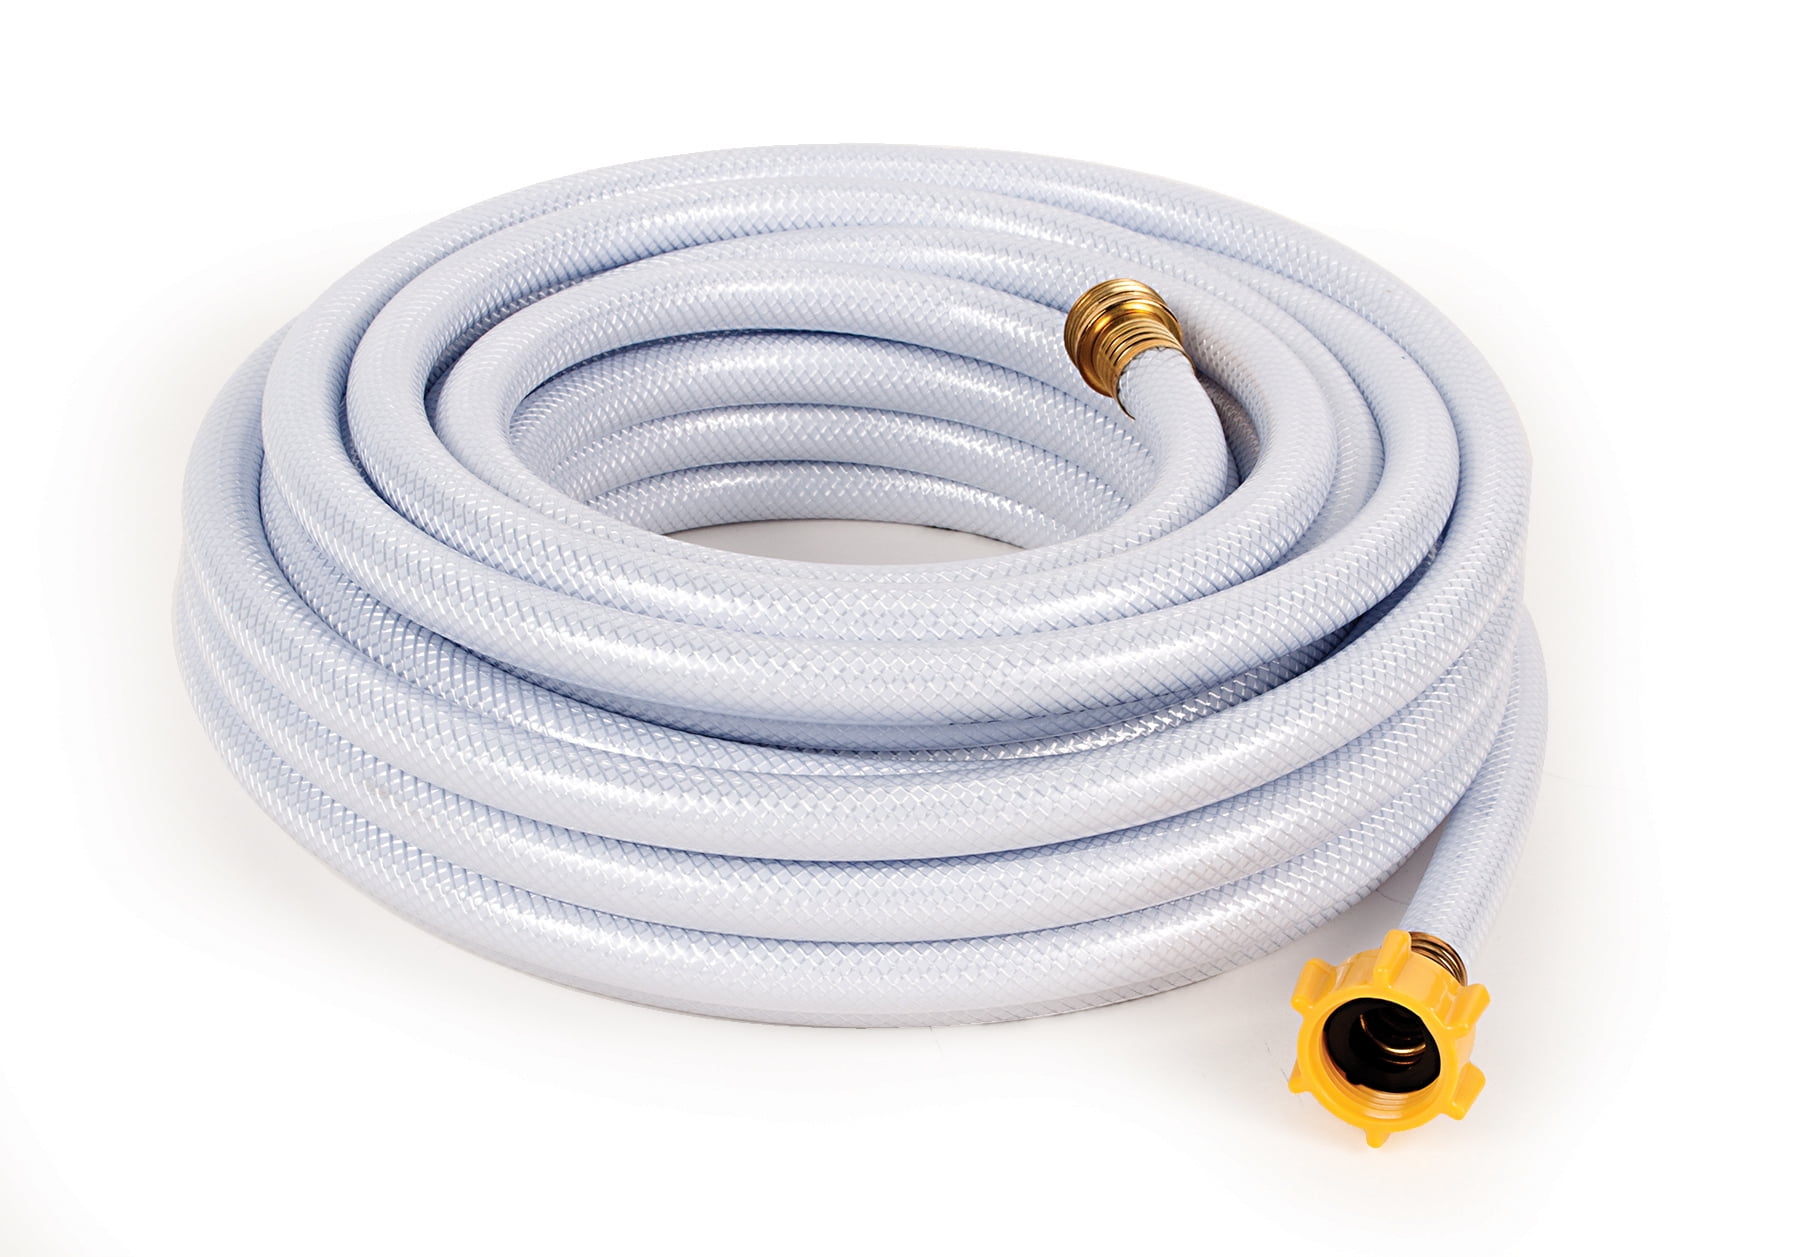 Lead and BPA Free Details about   Camco 25ft TastePURE Drinking Water Hose Kink Resistance 